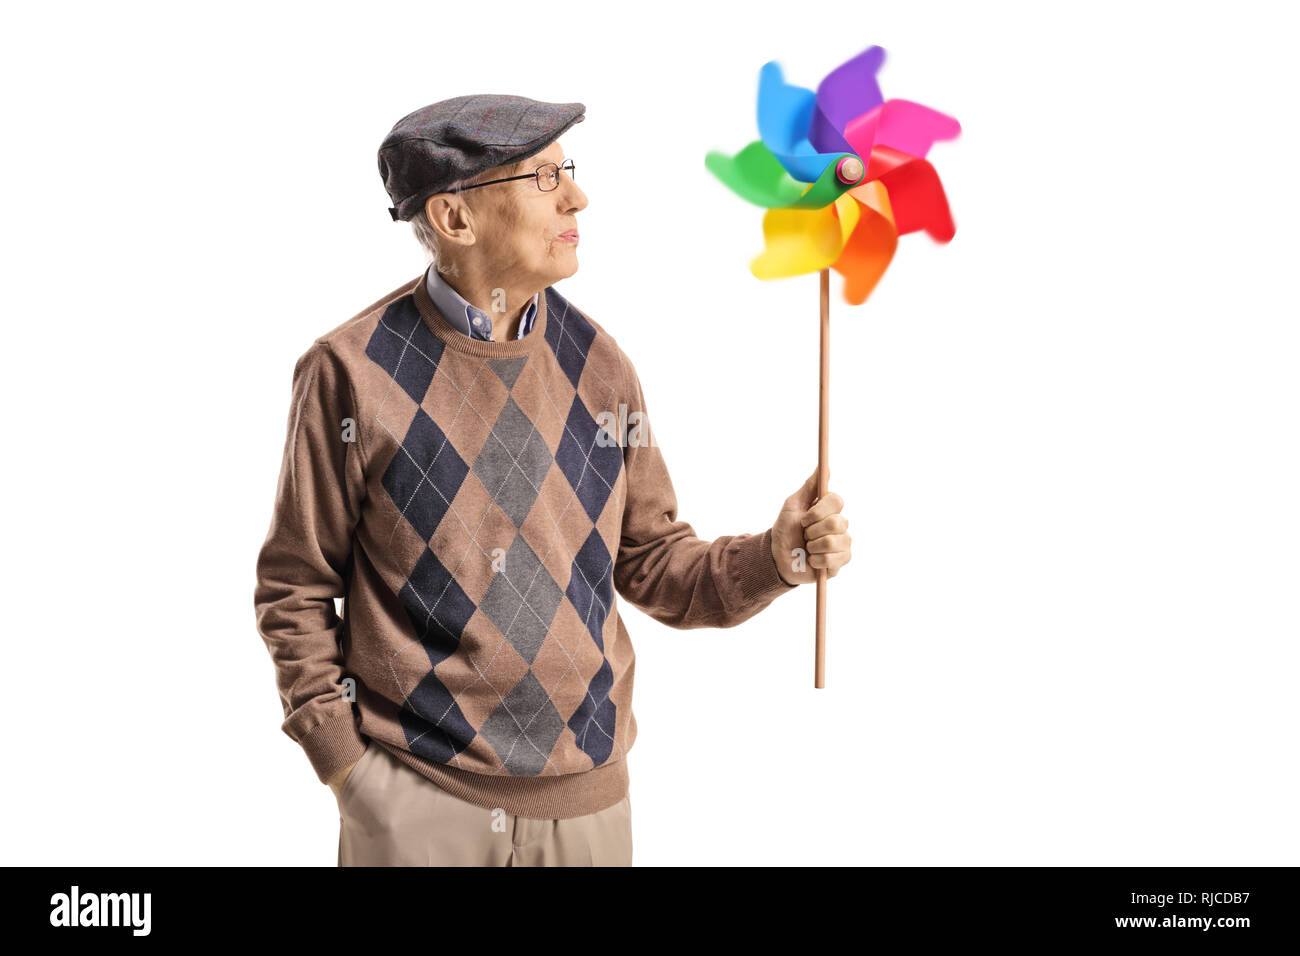 Senior man holding a spinning pinwheel and looking at it isolated on white background Stock Photo